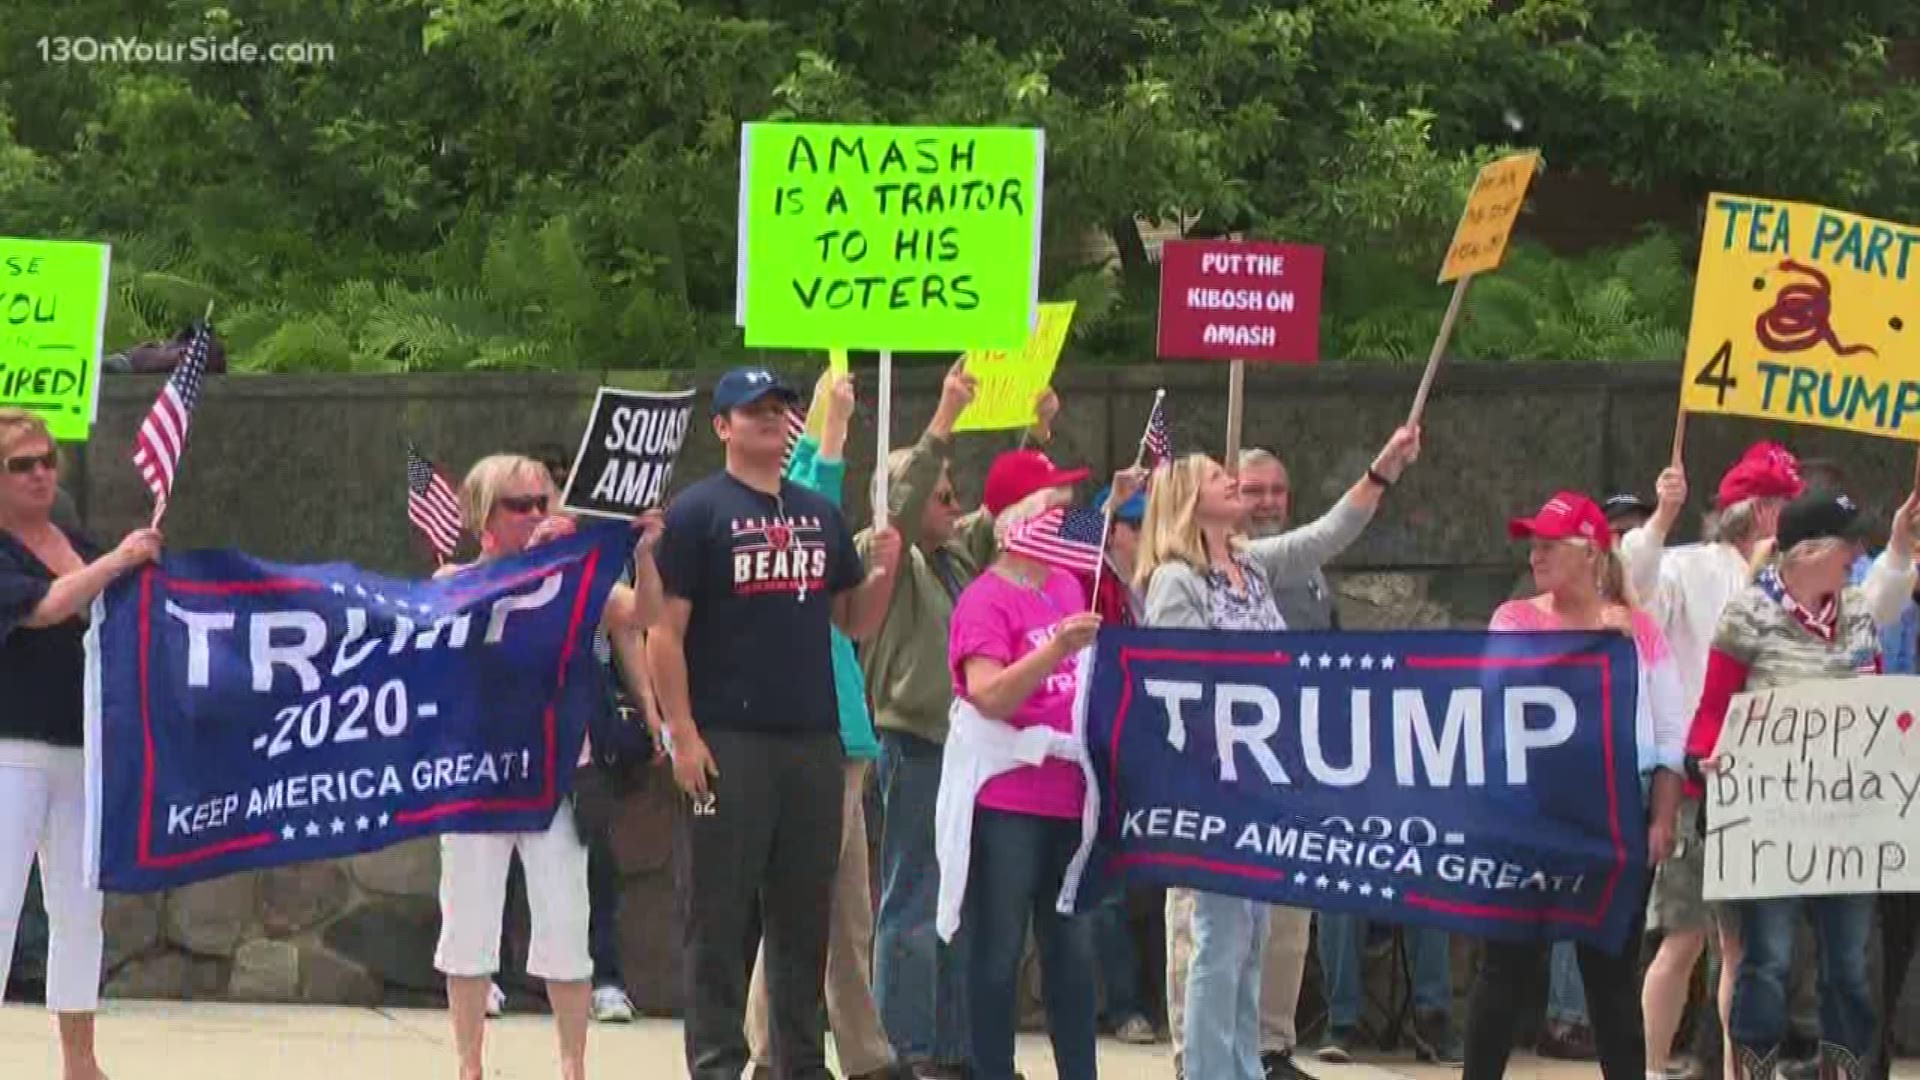 Trump supporters rally to 'Squash Amash'